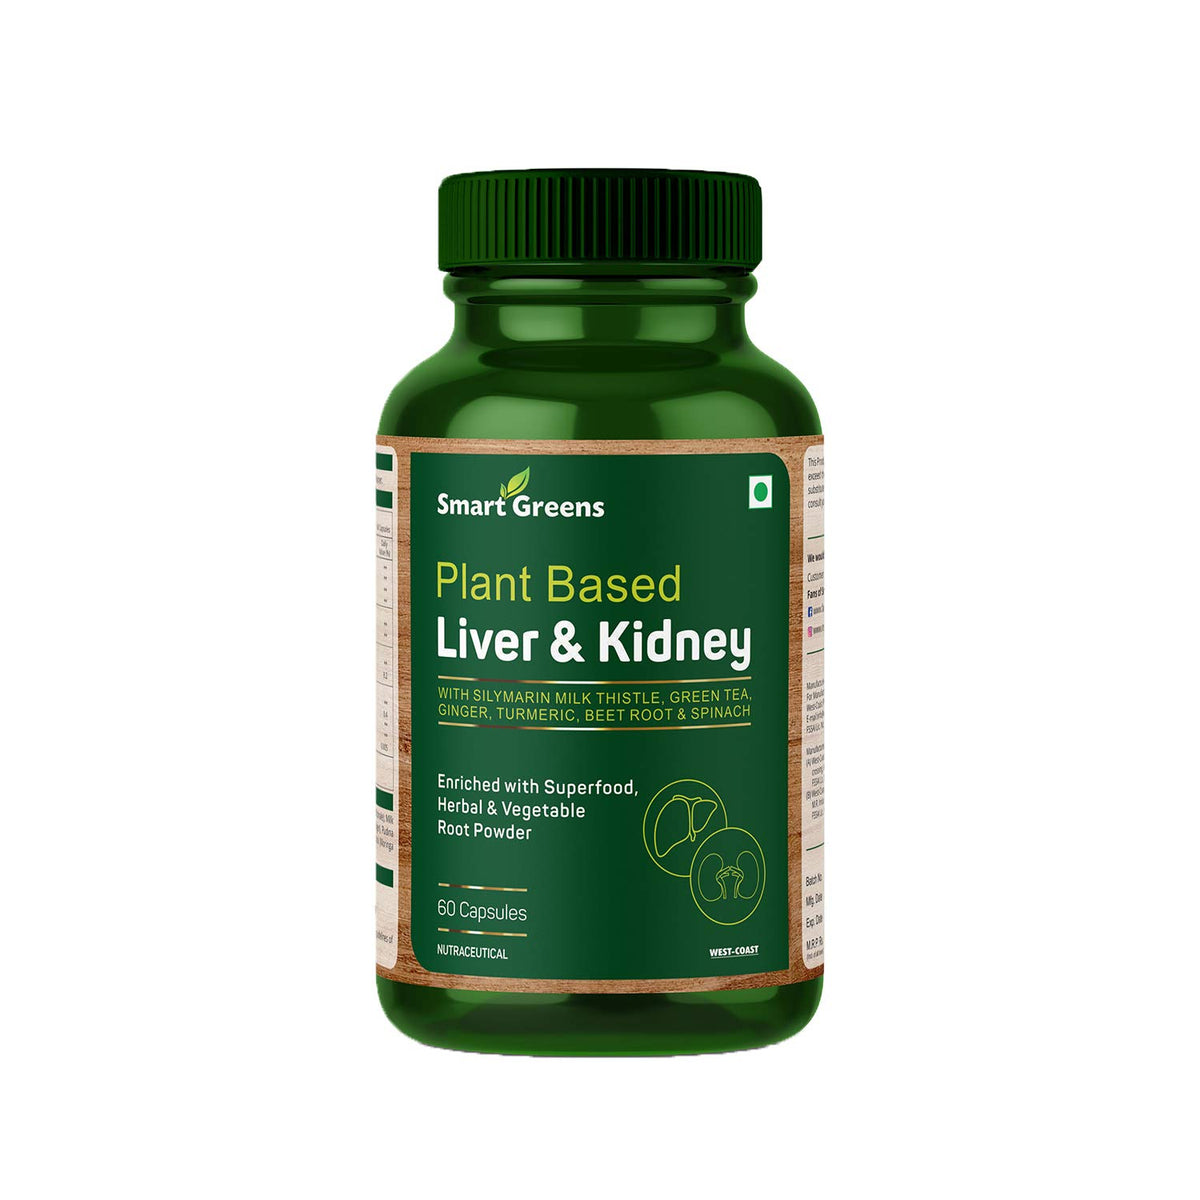 Smart Greens Plant Based Liver & Kidney Enriched with Silymarin Milk Thistle, Green Tea, Ginger, Turmeric, Beetroot & Spinach – 60 Capsules